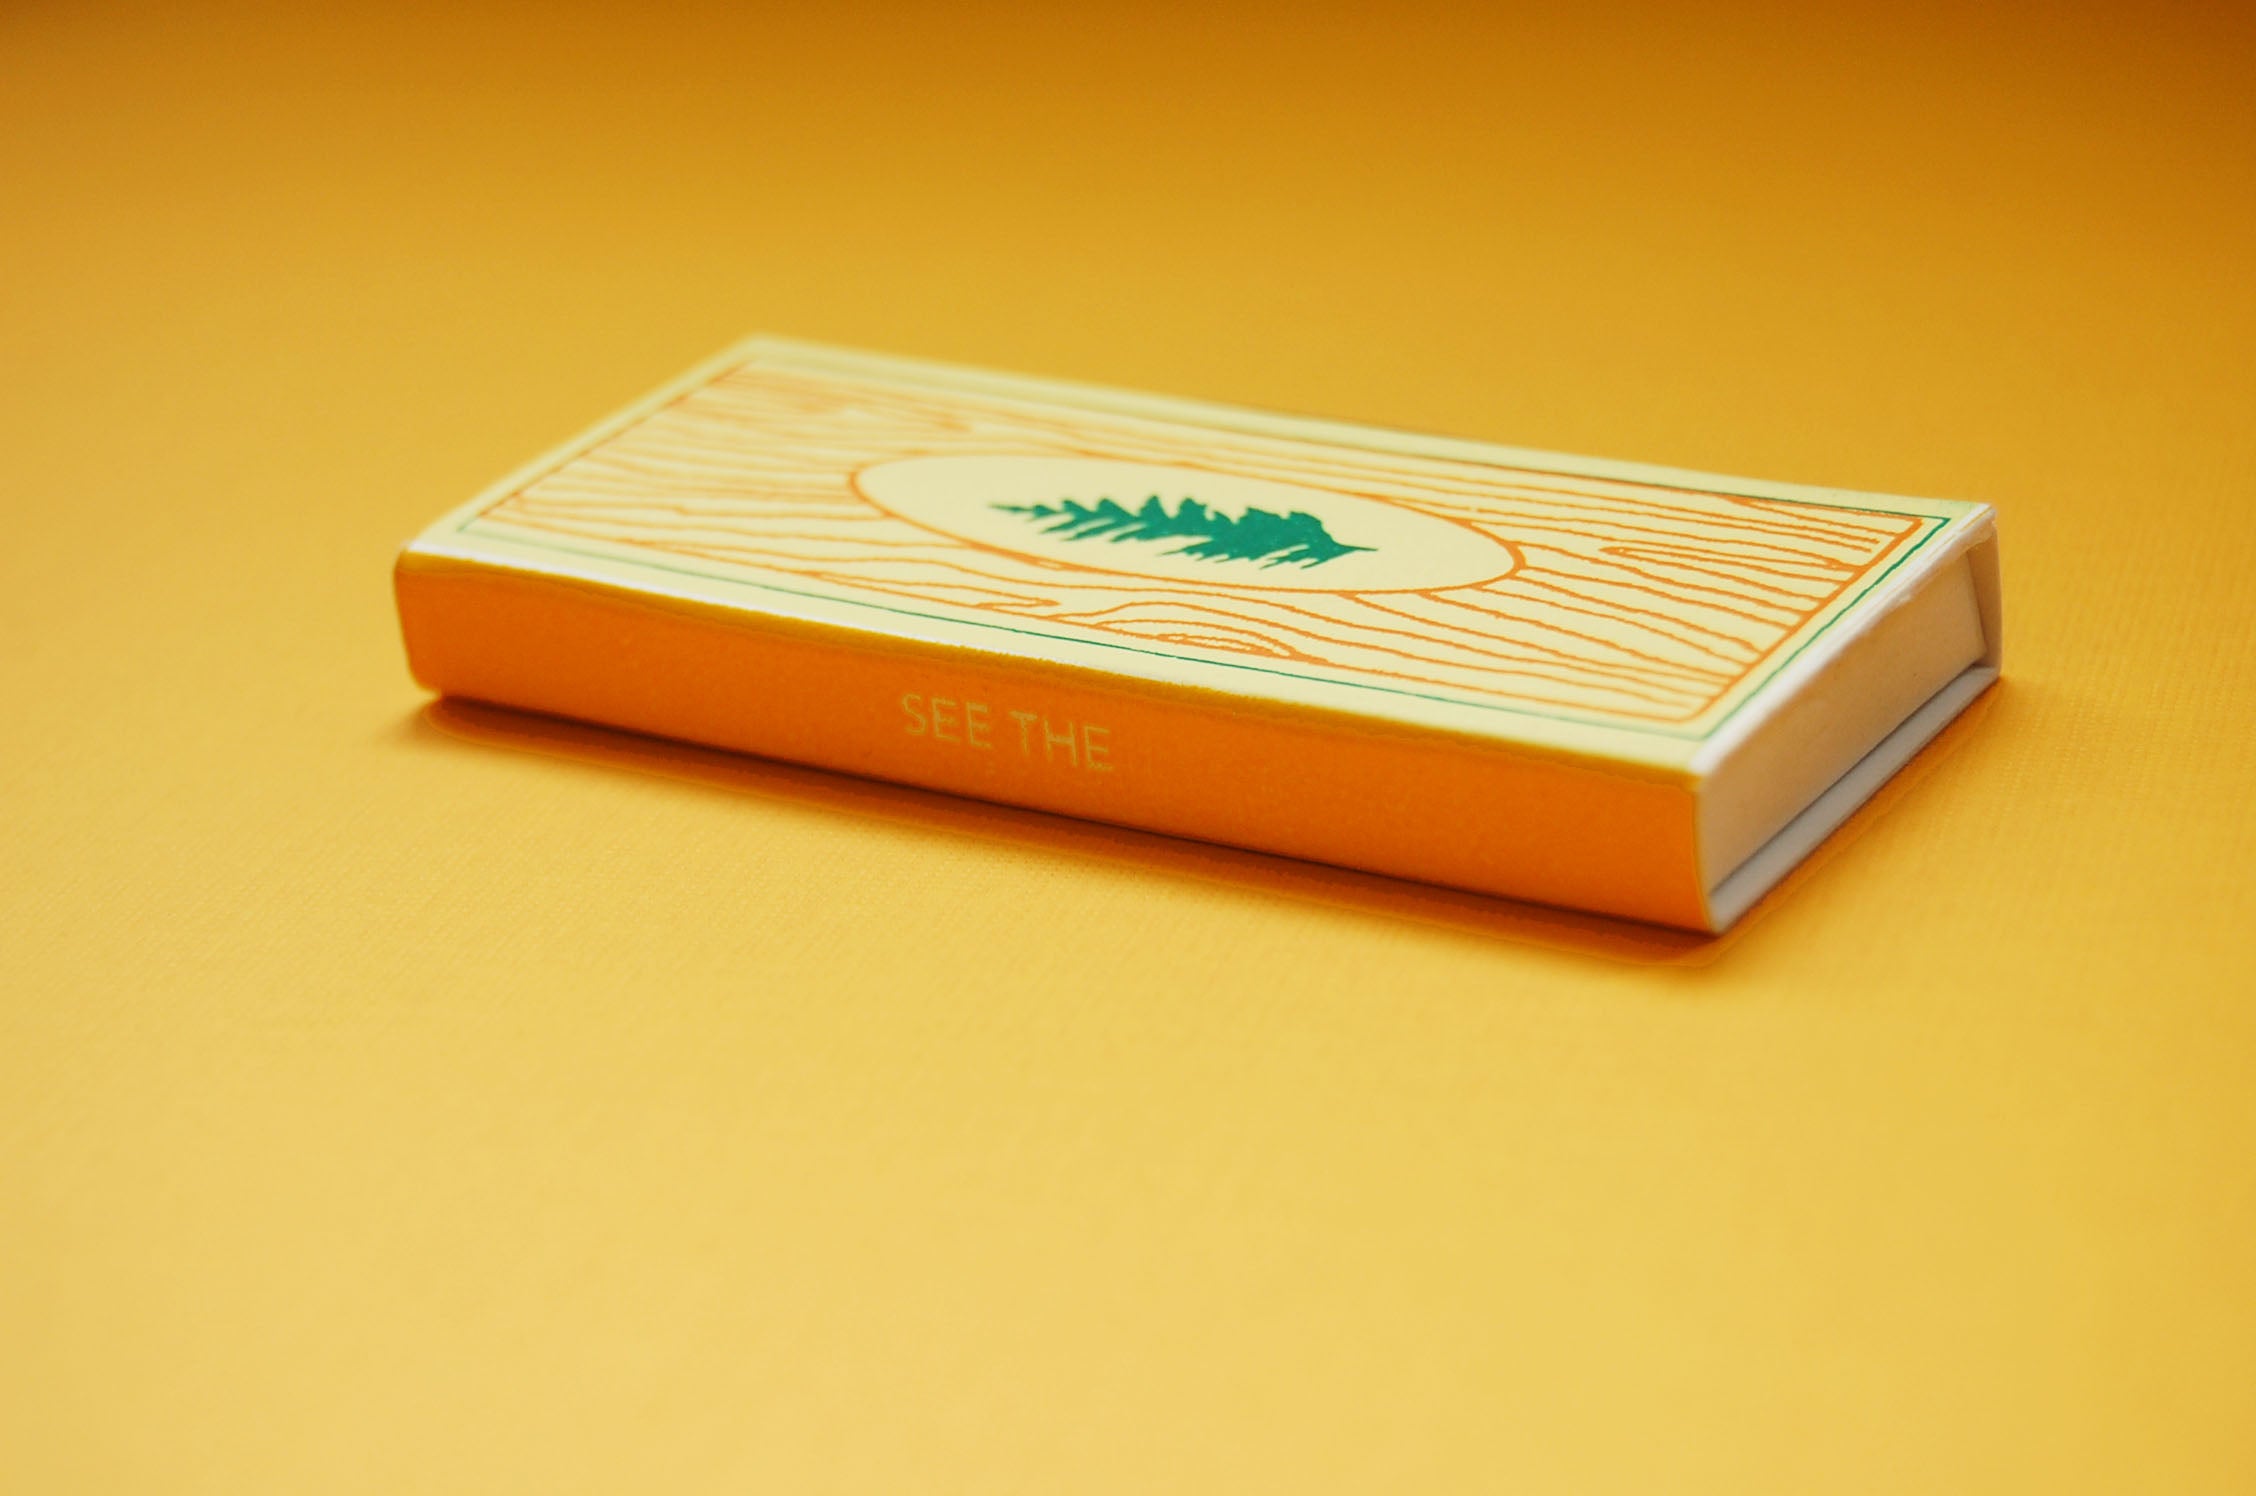 Limited edition japanese matchboxes by Keap Objectify